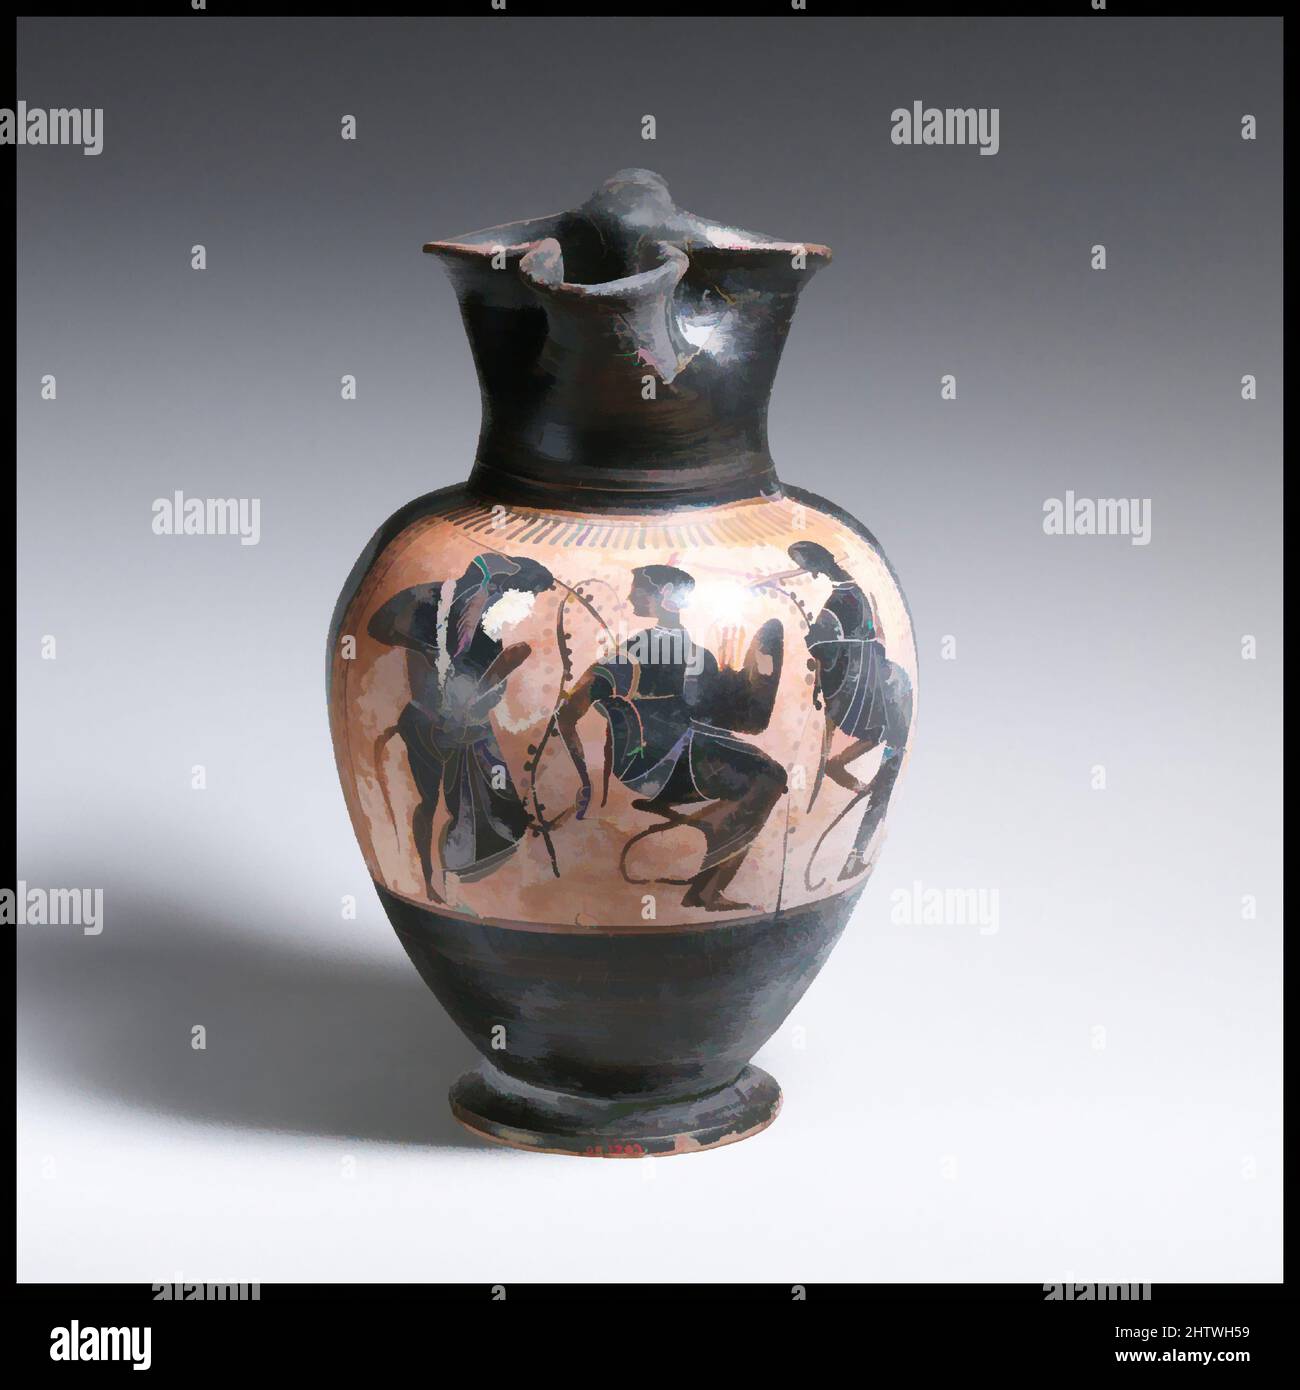 Art inspired by Oinochoe, Archaic, last quarter of the 6th century B.C., Greek, Attic, Terracotta; black-figure, Other: 8 1/2 × 5 1/2 × 3 1/8 in. (21.6 × 13.9 × 8 cm), Vases, Classic works modernized by Artotop with a splash of modernity. Shapes, color and value, eye-catching visual impact on art. Emotions through freedom of artworks in a contemporary way. A timeless message pursuing a wildly creative new direction. Artists turning to the digital medium and creating the Artotop NFT Stock Photo